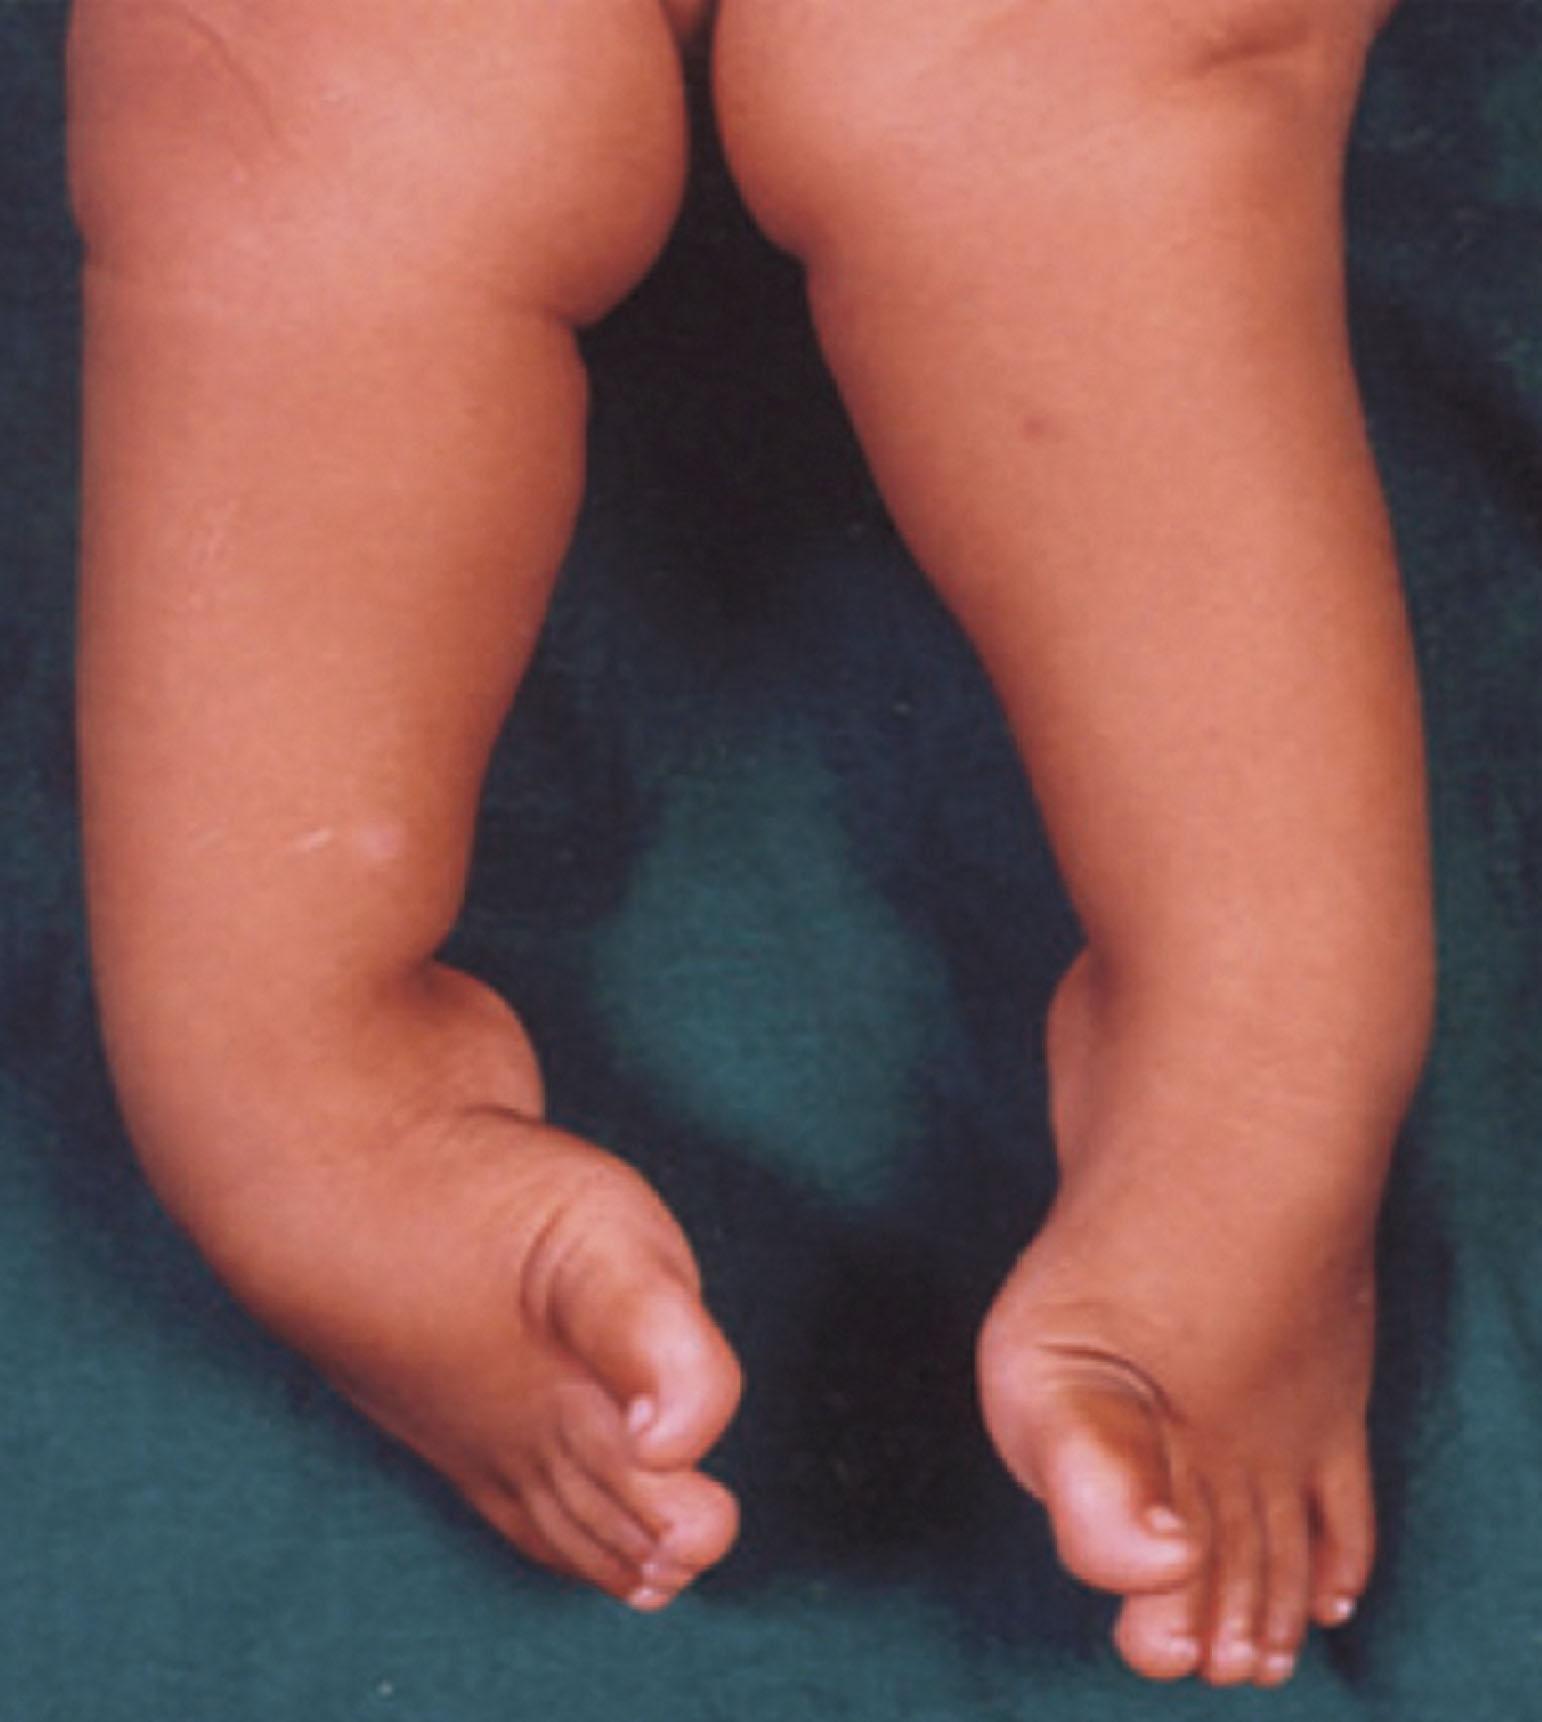 Figure 201.1, Clinical picture demonstrating clubfoot deformity.